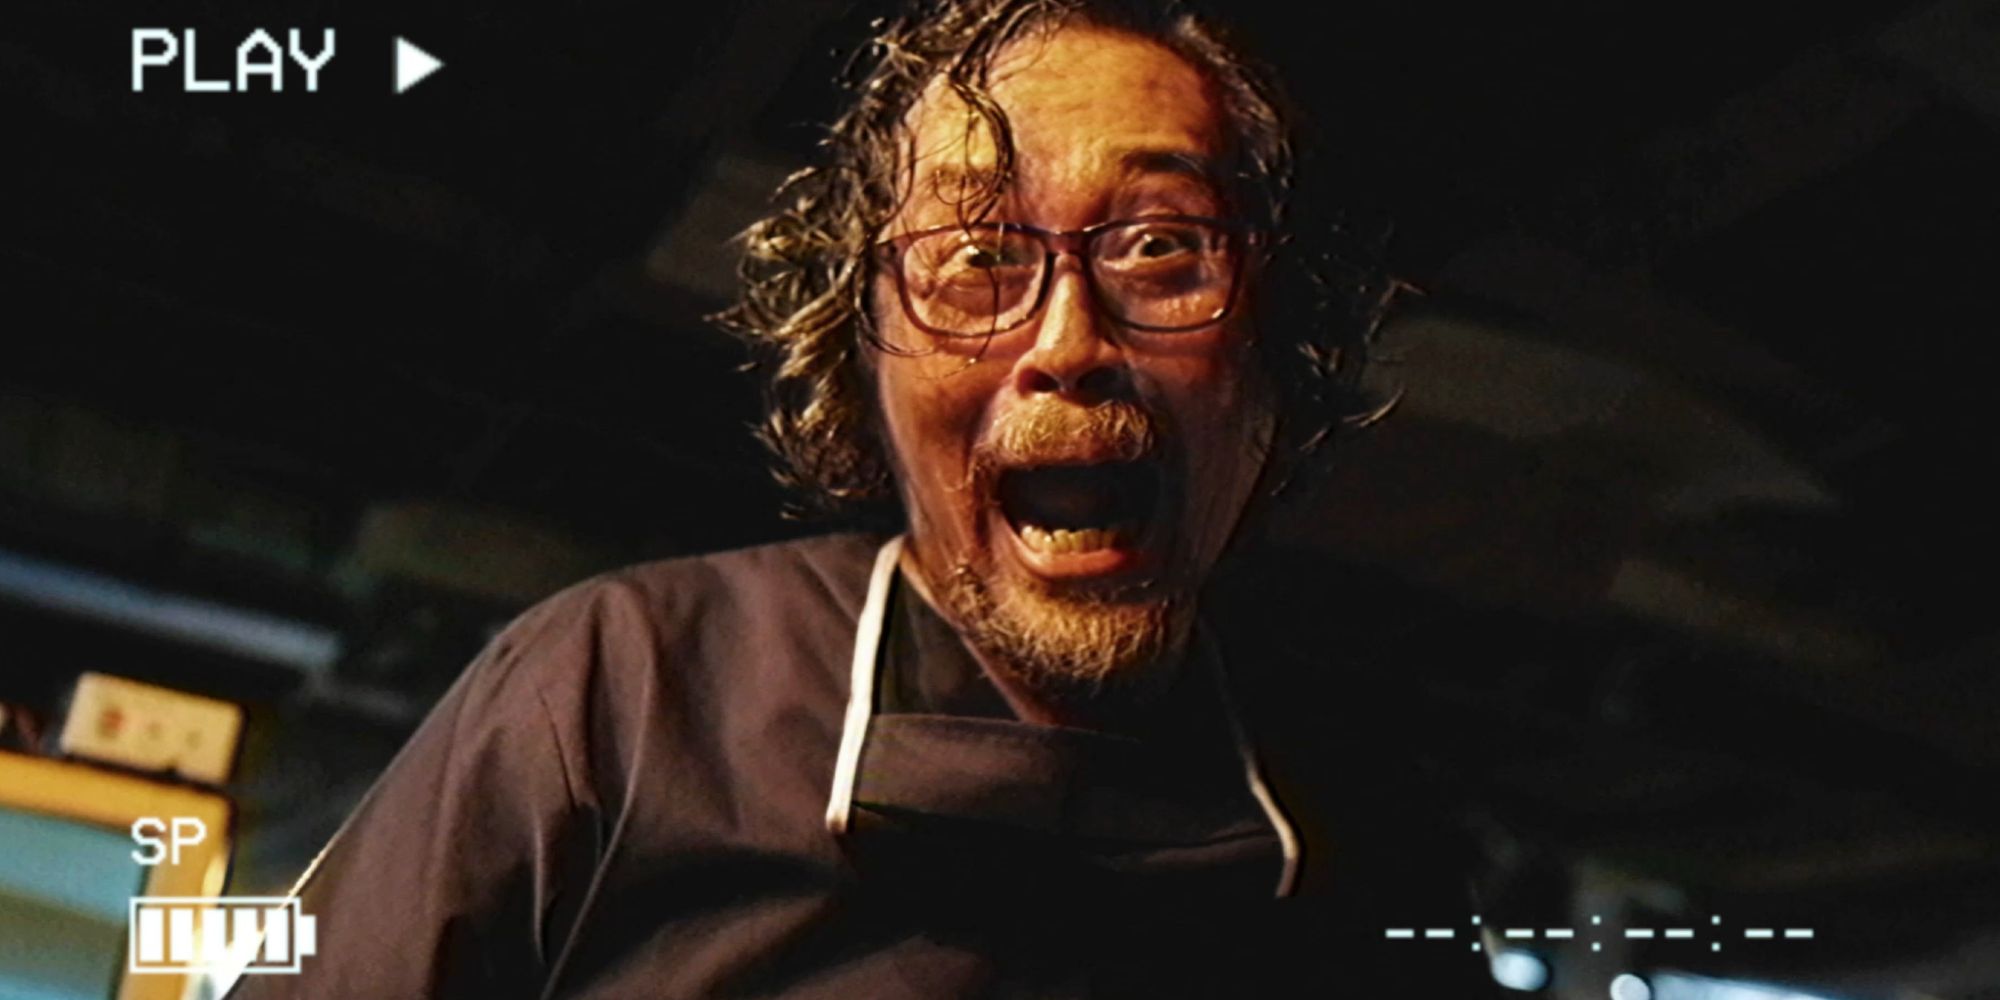 A man screams while looking into the camera in VHS94